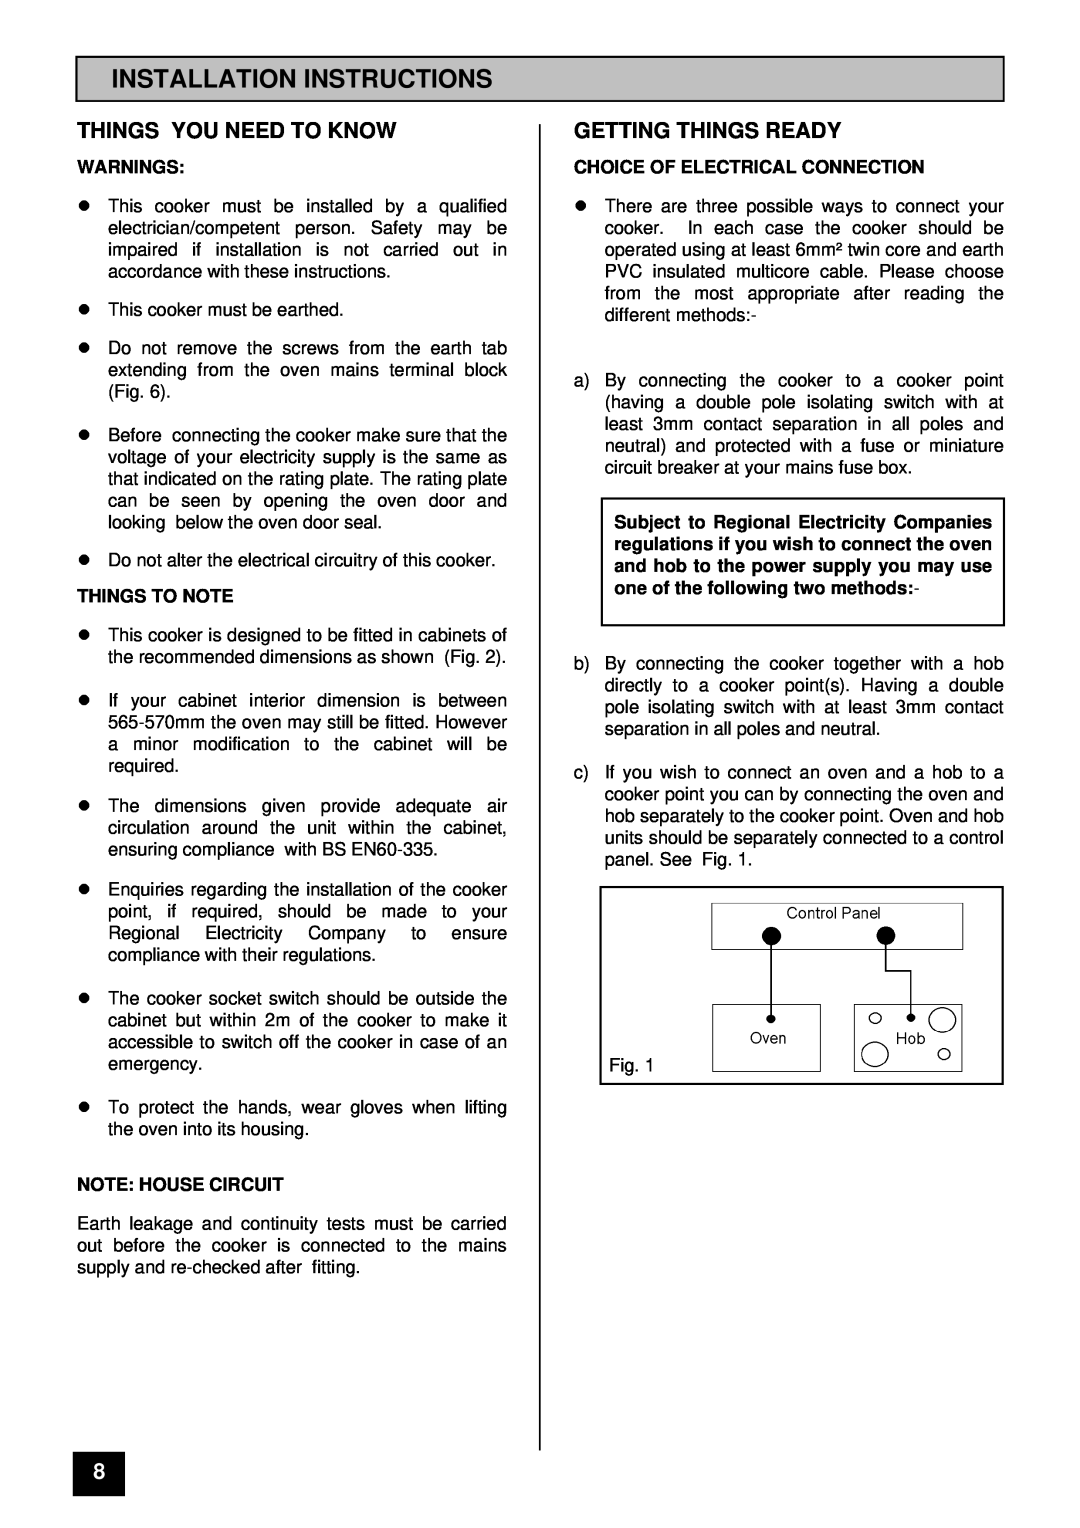 Tricity Bendix DEVON Installation Instructions, Things You Need To Know, Getting Things Ready, Warnings, Things To Note 